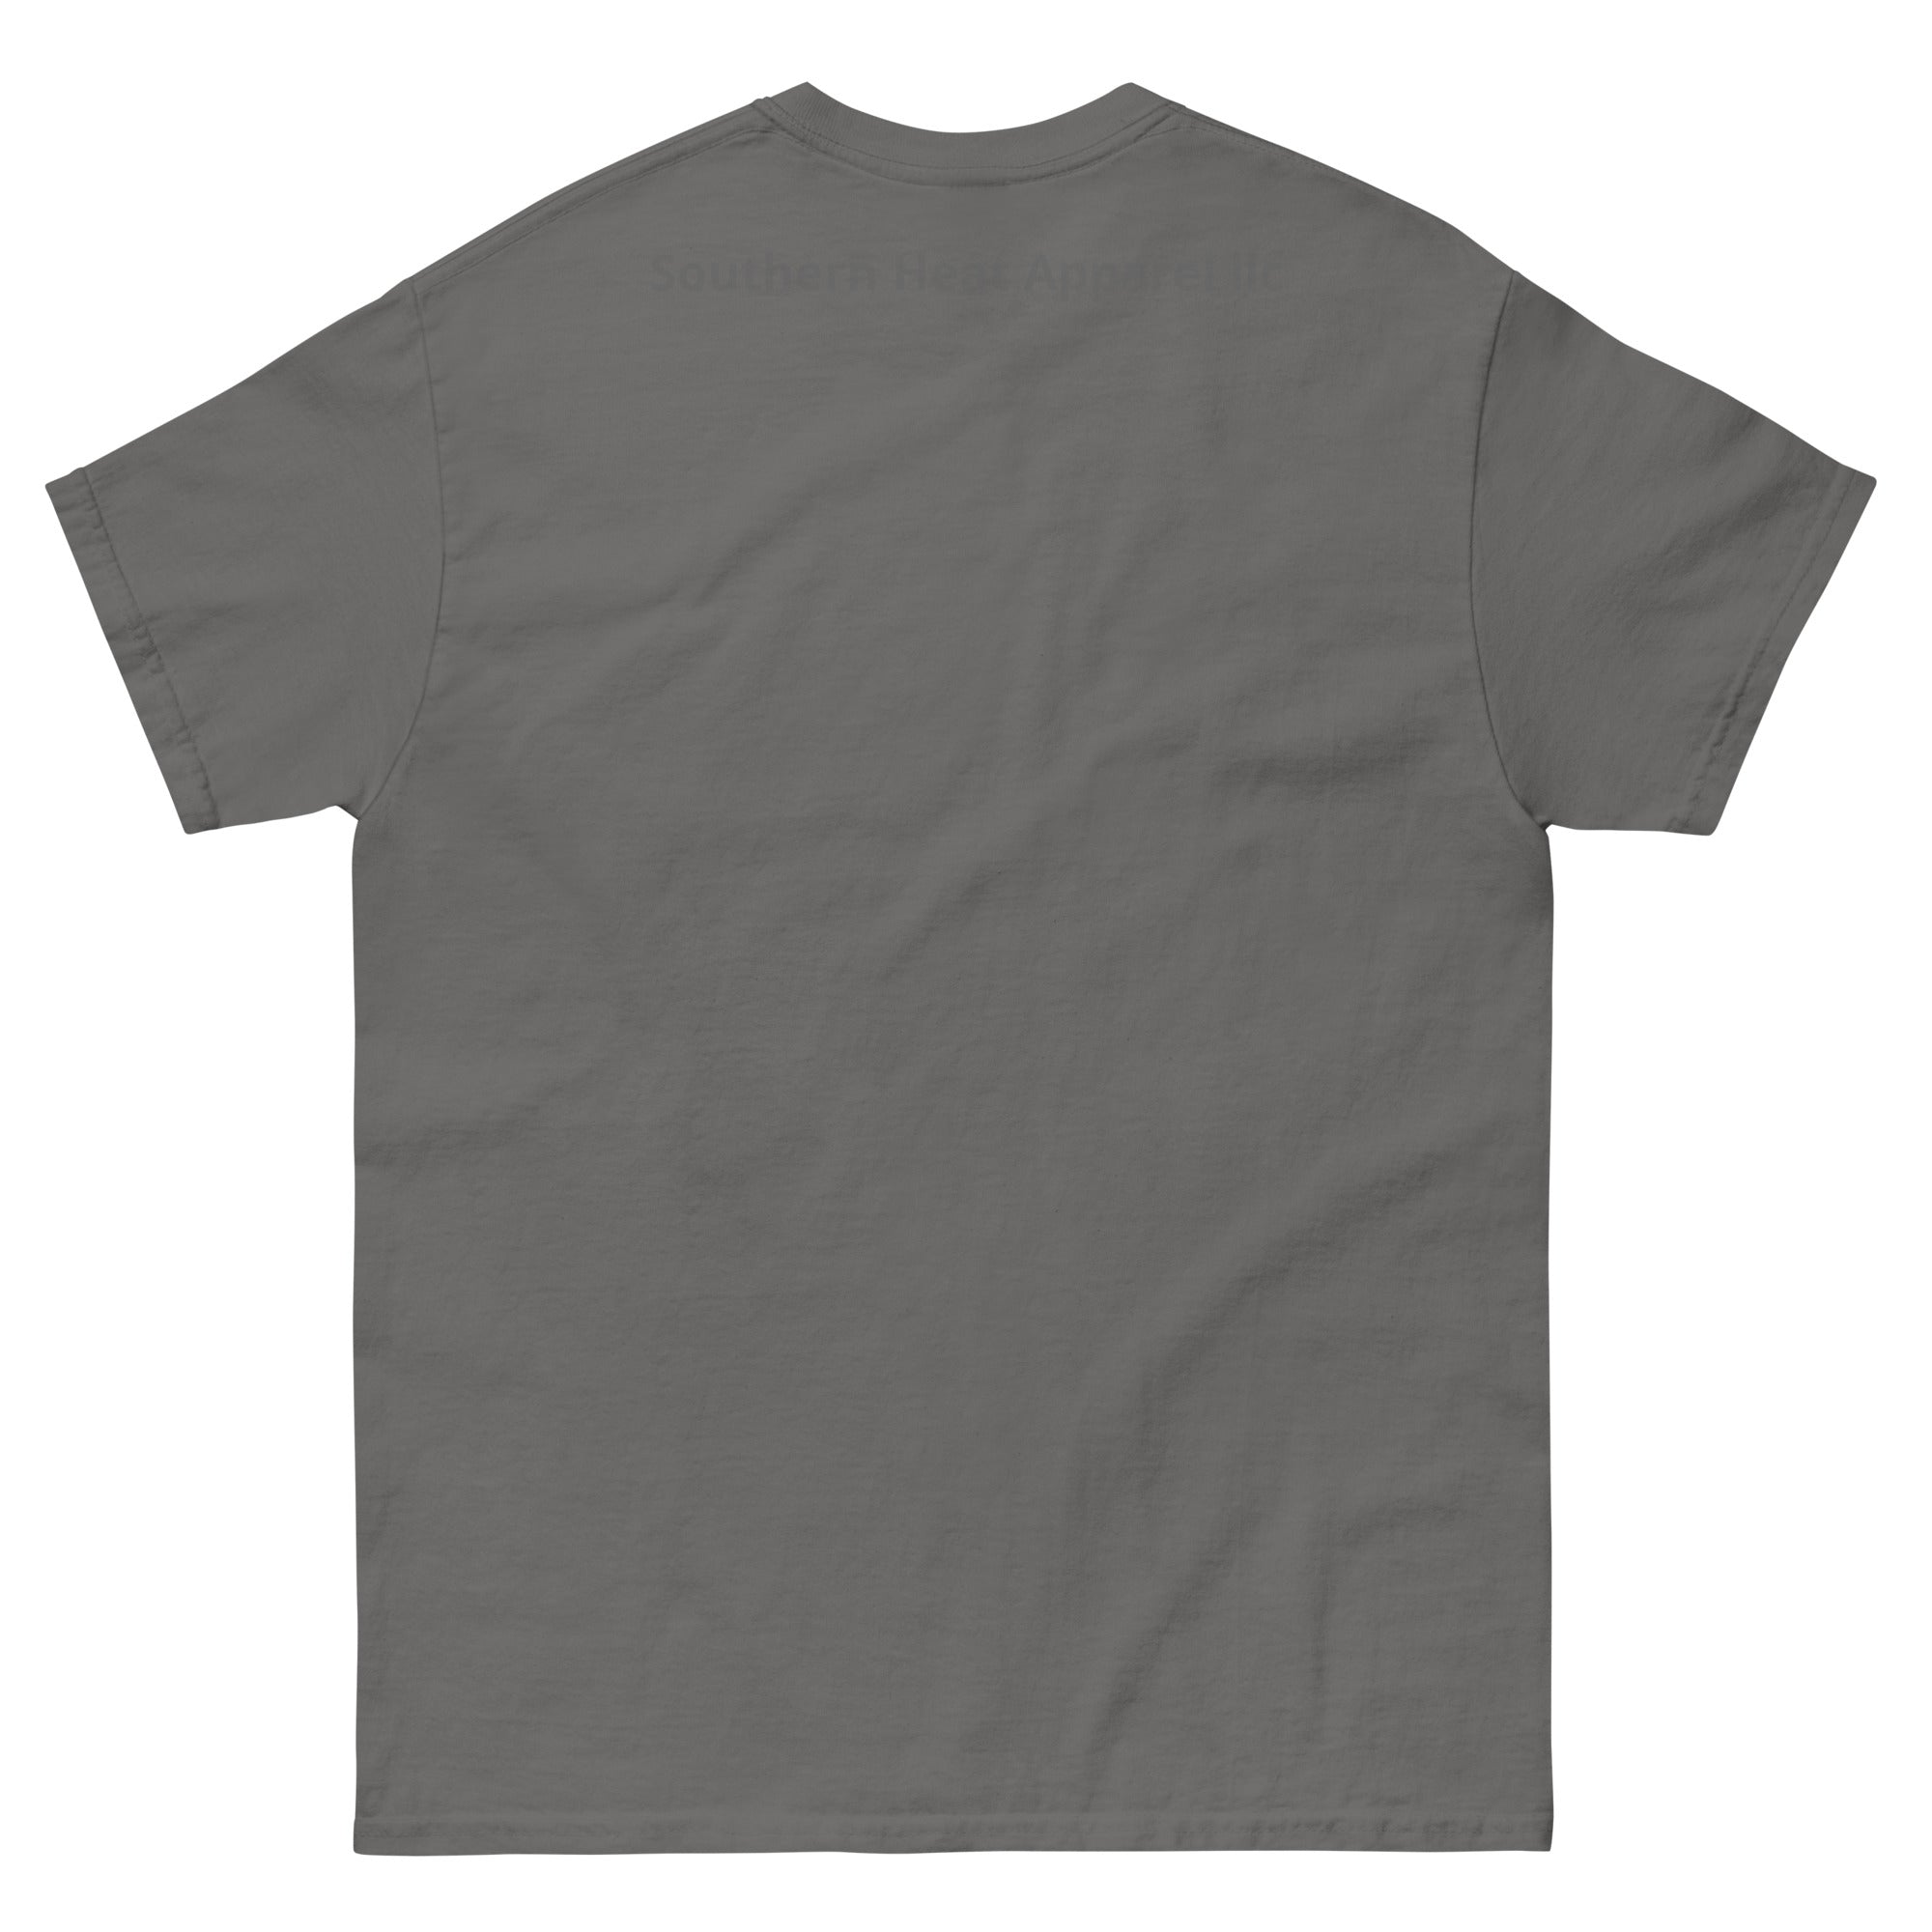 Kindness is contagious-Men's classic tee